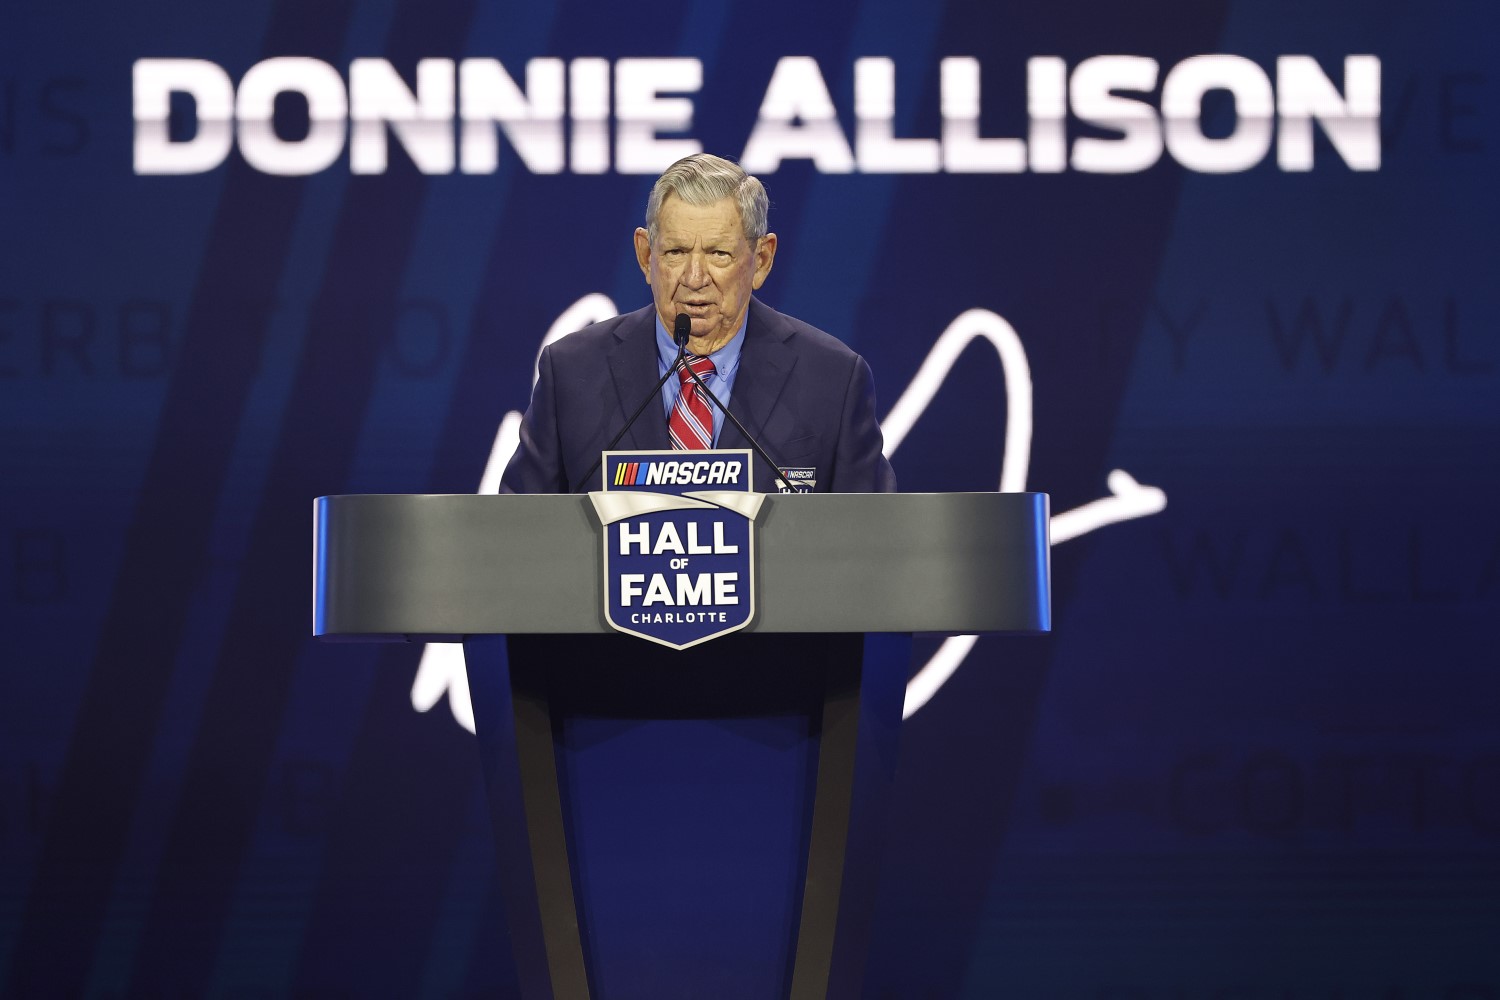 NASCAR Hall of Fame inductee Donnie Allison speaks during the 2024 NASCAR Hall of Fame Induction Ceremony at Charlotte Convention Center on January 19, 2024 in Charlotte, North Carolina. (Photo by Chris Graythen/Getty Images)